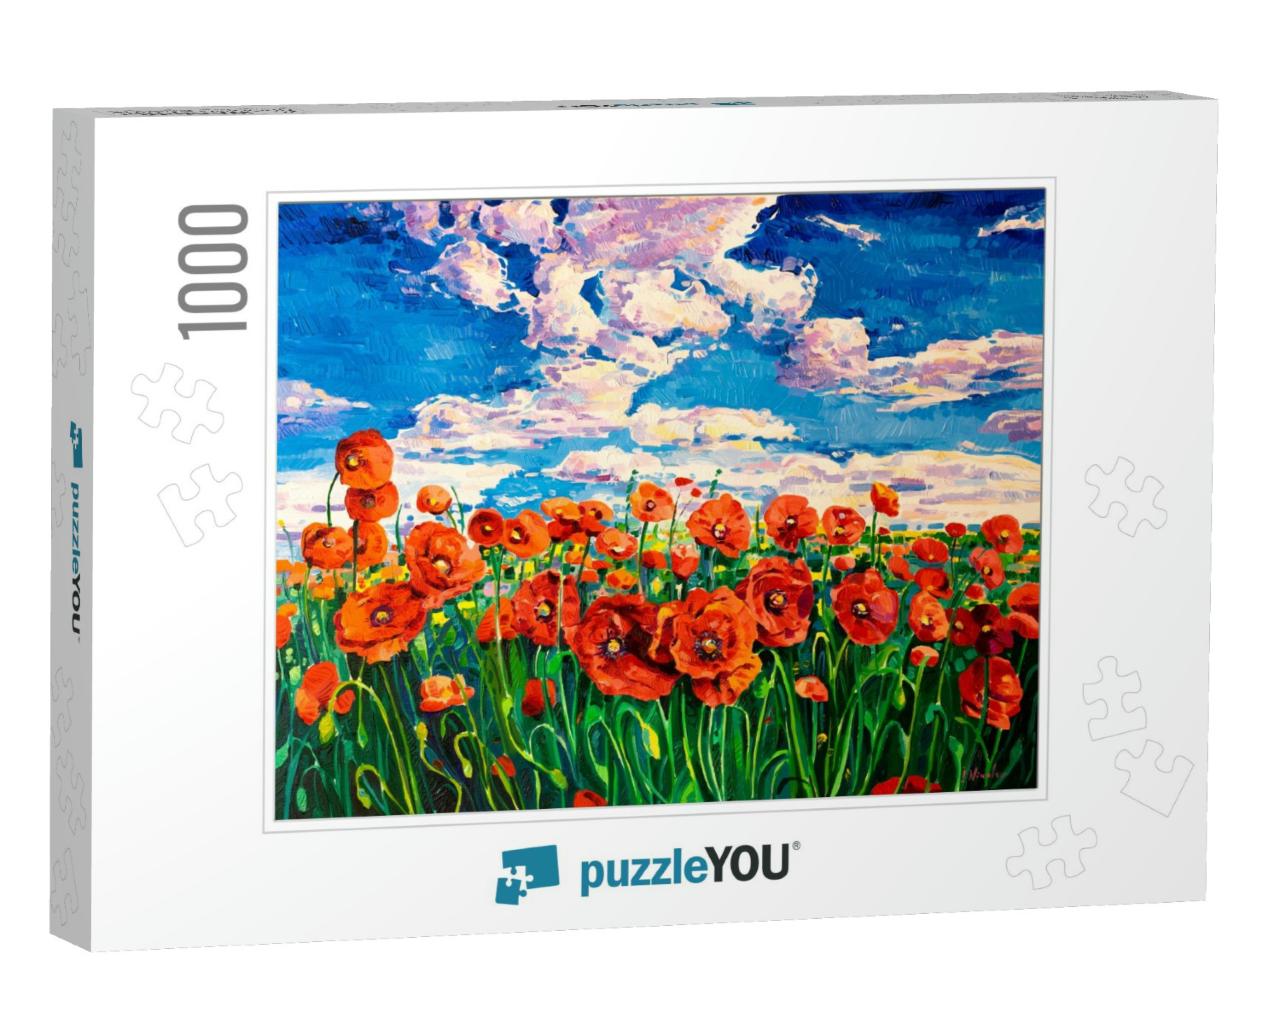 Oil Painting. Red Poppy Field. Modern Art... Jigsaw Puzzle with 1000 pieces